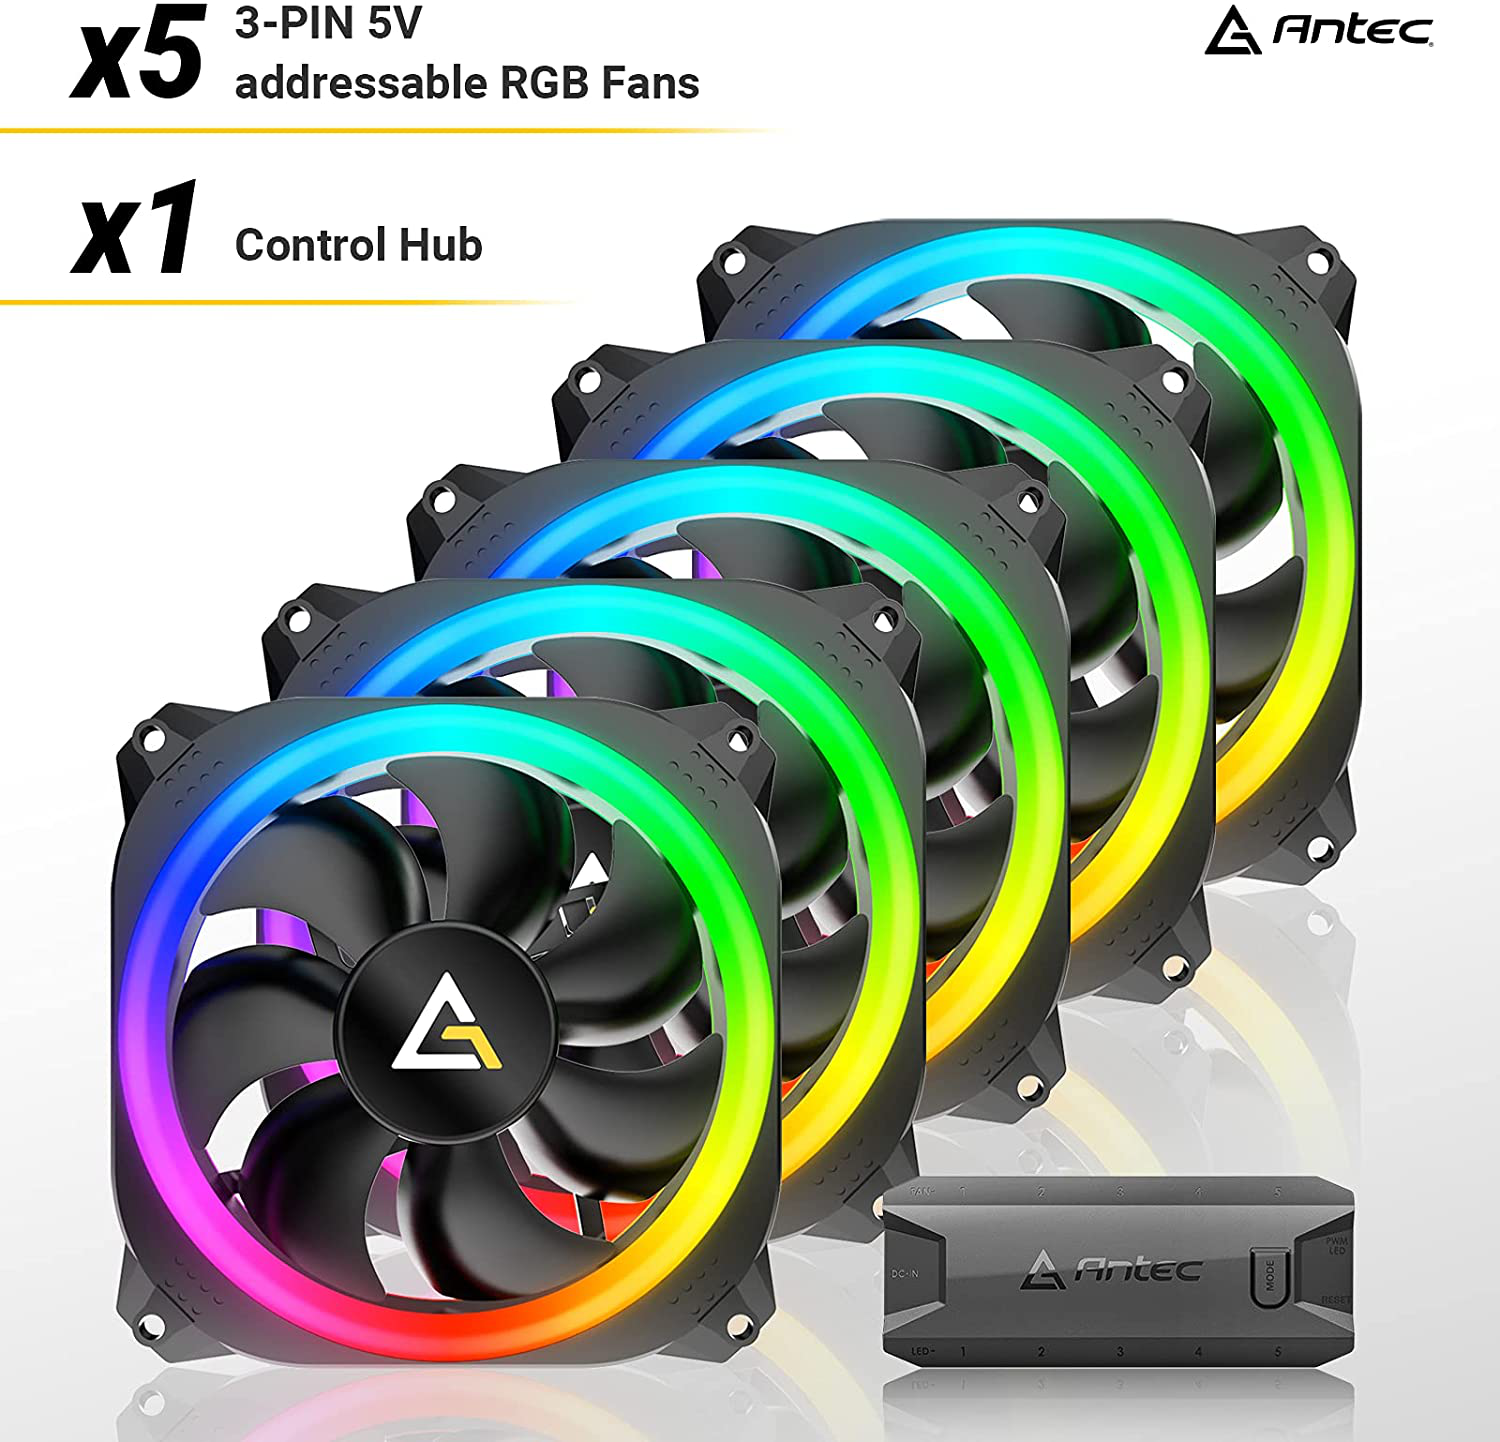 Antec RGB Fans, PC Fans 120Mm RGB Fans, 5V-3PIN Addressable RGB Fans, Motherboard SYNC with 5V-3PIN, 120Mm Fan 5 Packs with Controller, Prizm Series RGB Fans